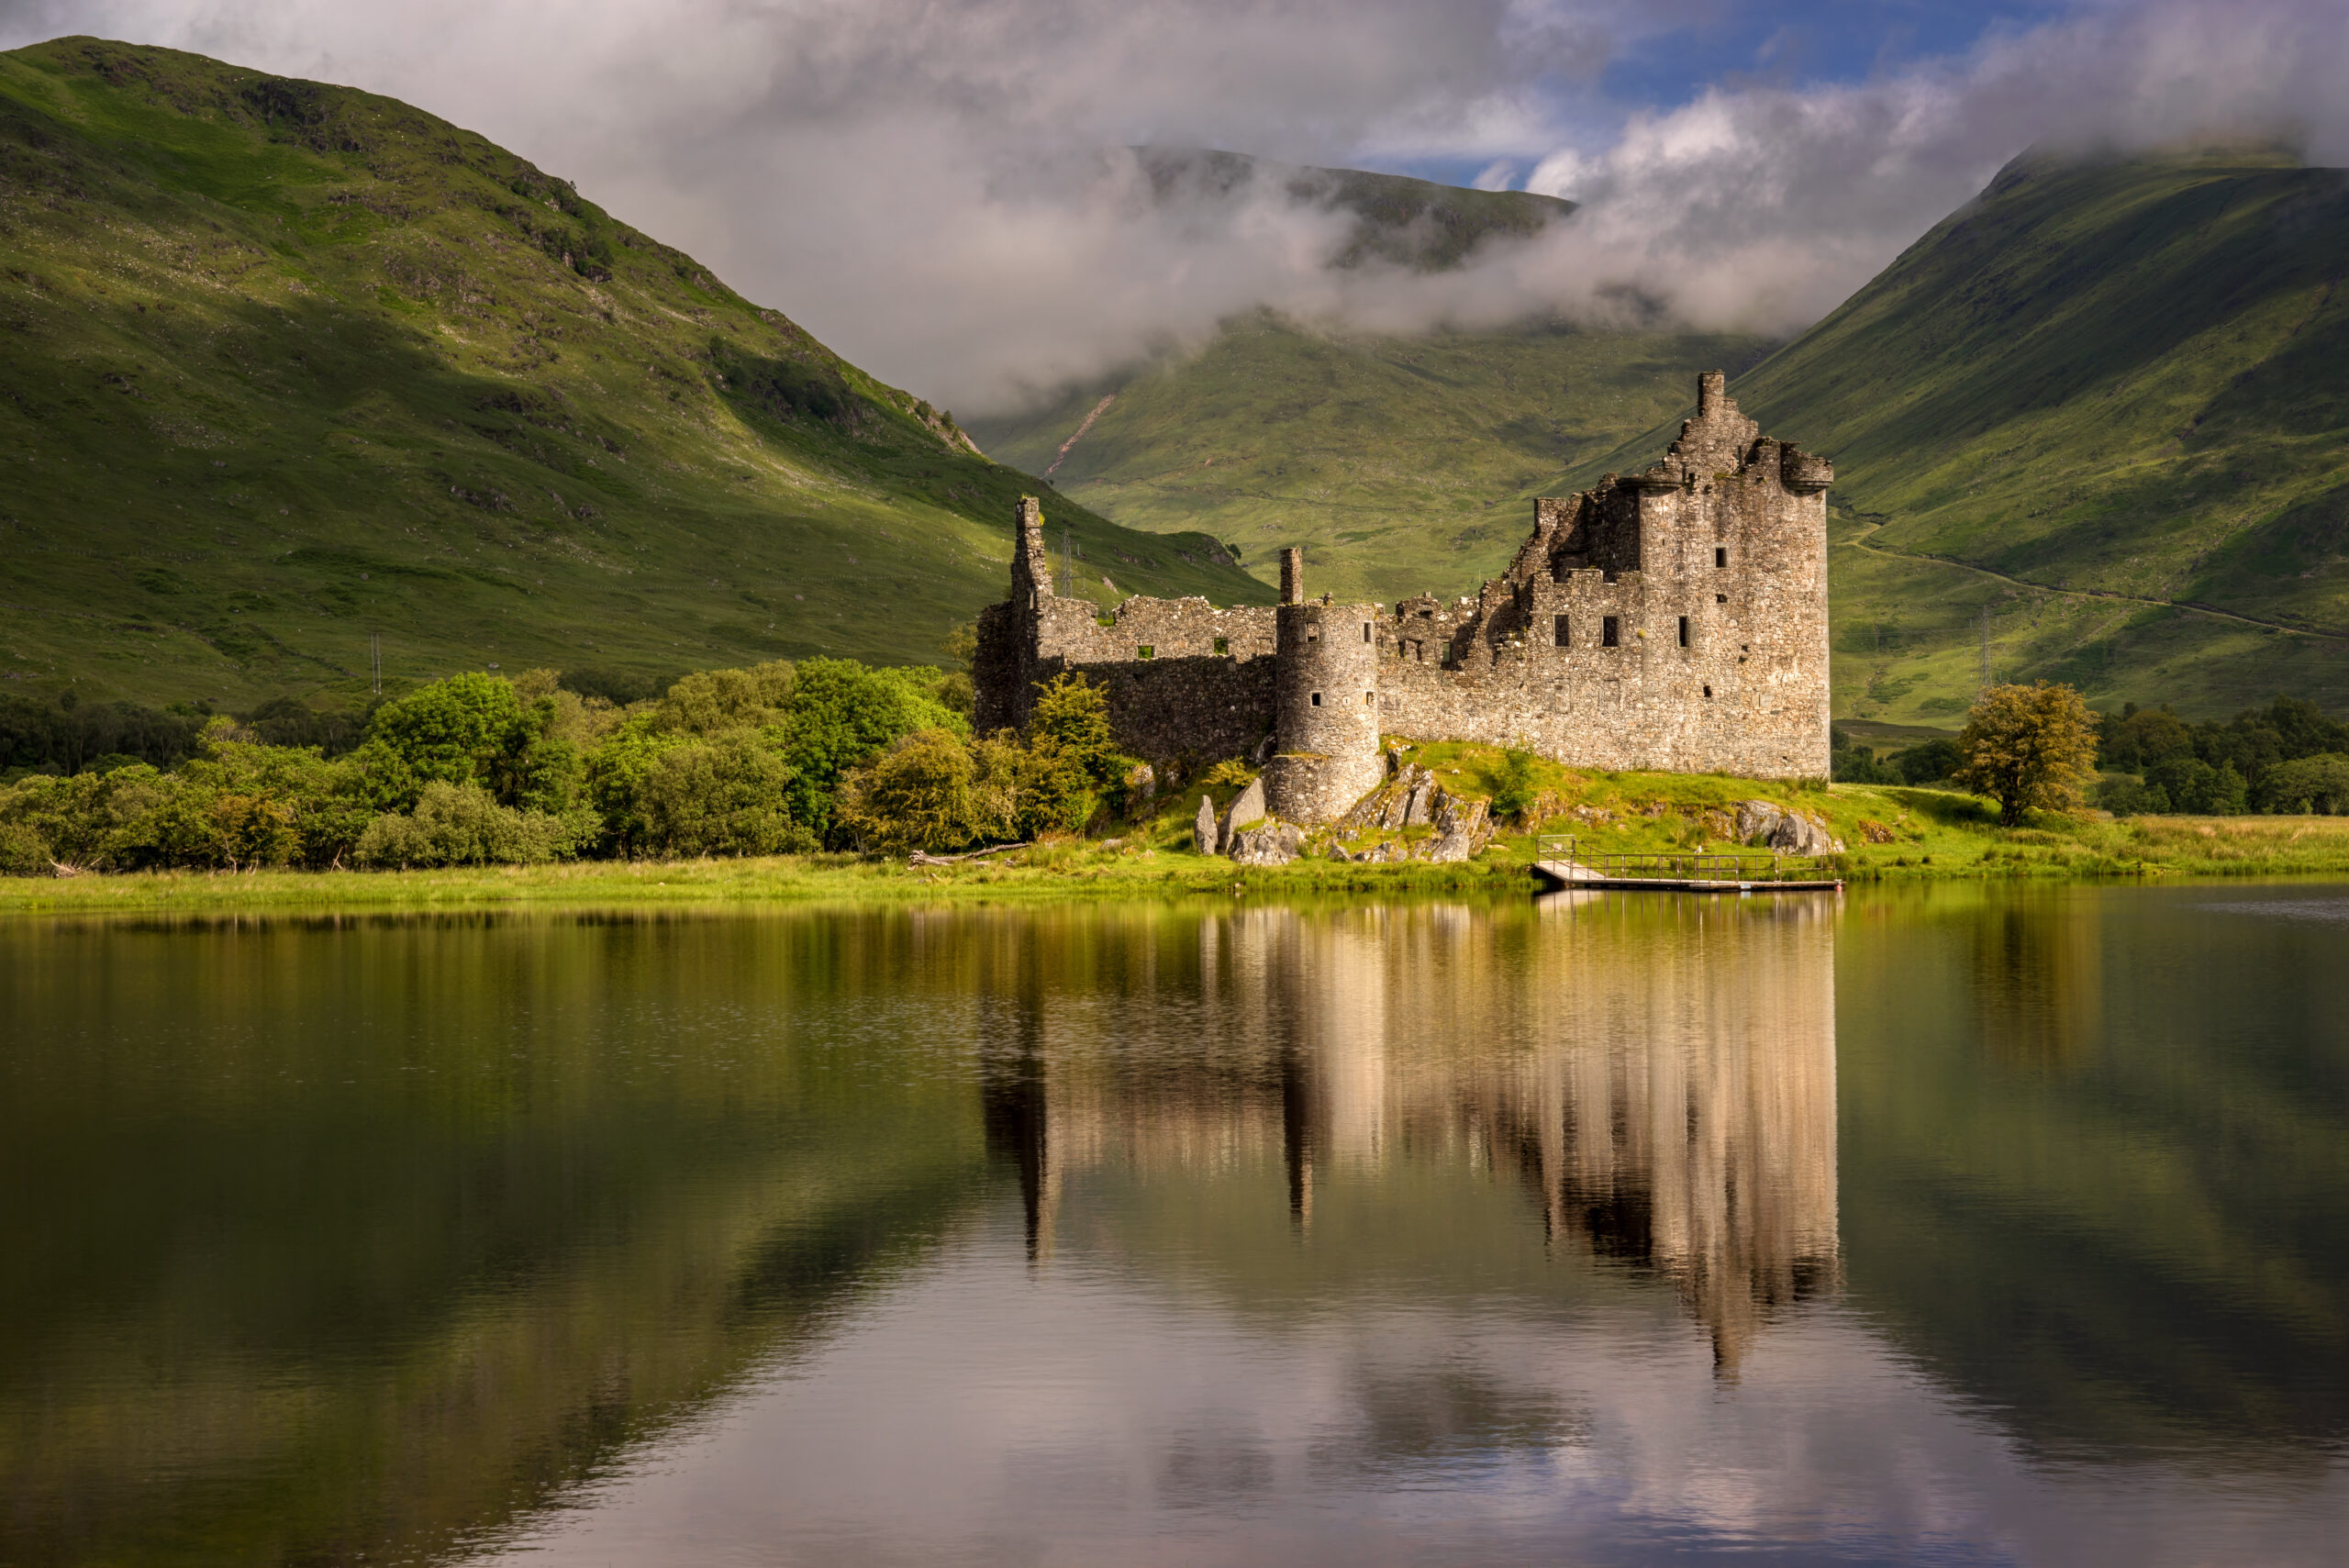 scottish-fixer-swixer-local-production-services-in-scotland-castle-in-highlands-at-lake